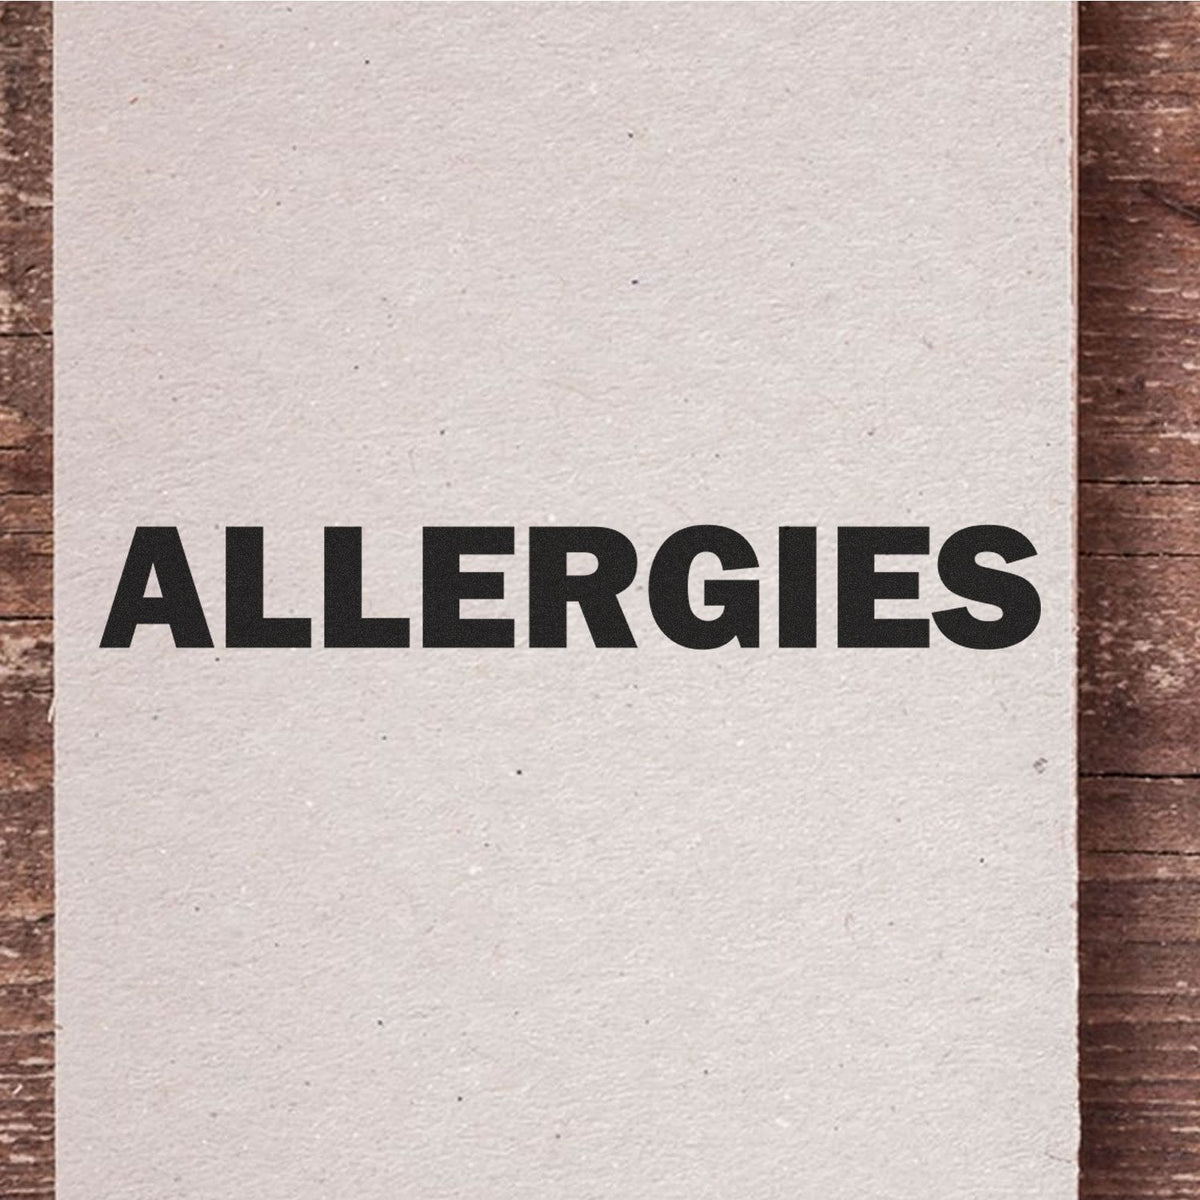 Bold Allergies Rubber Stamp Lifestyle Photo